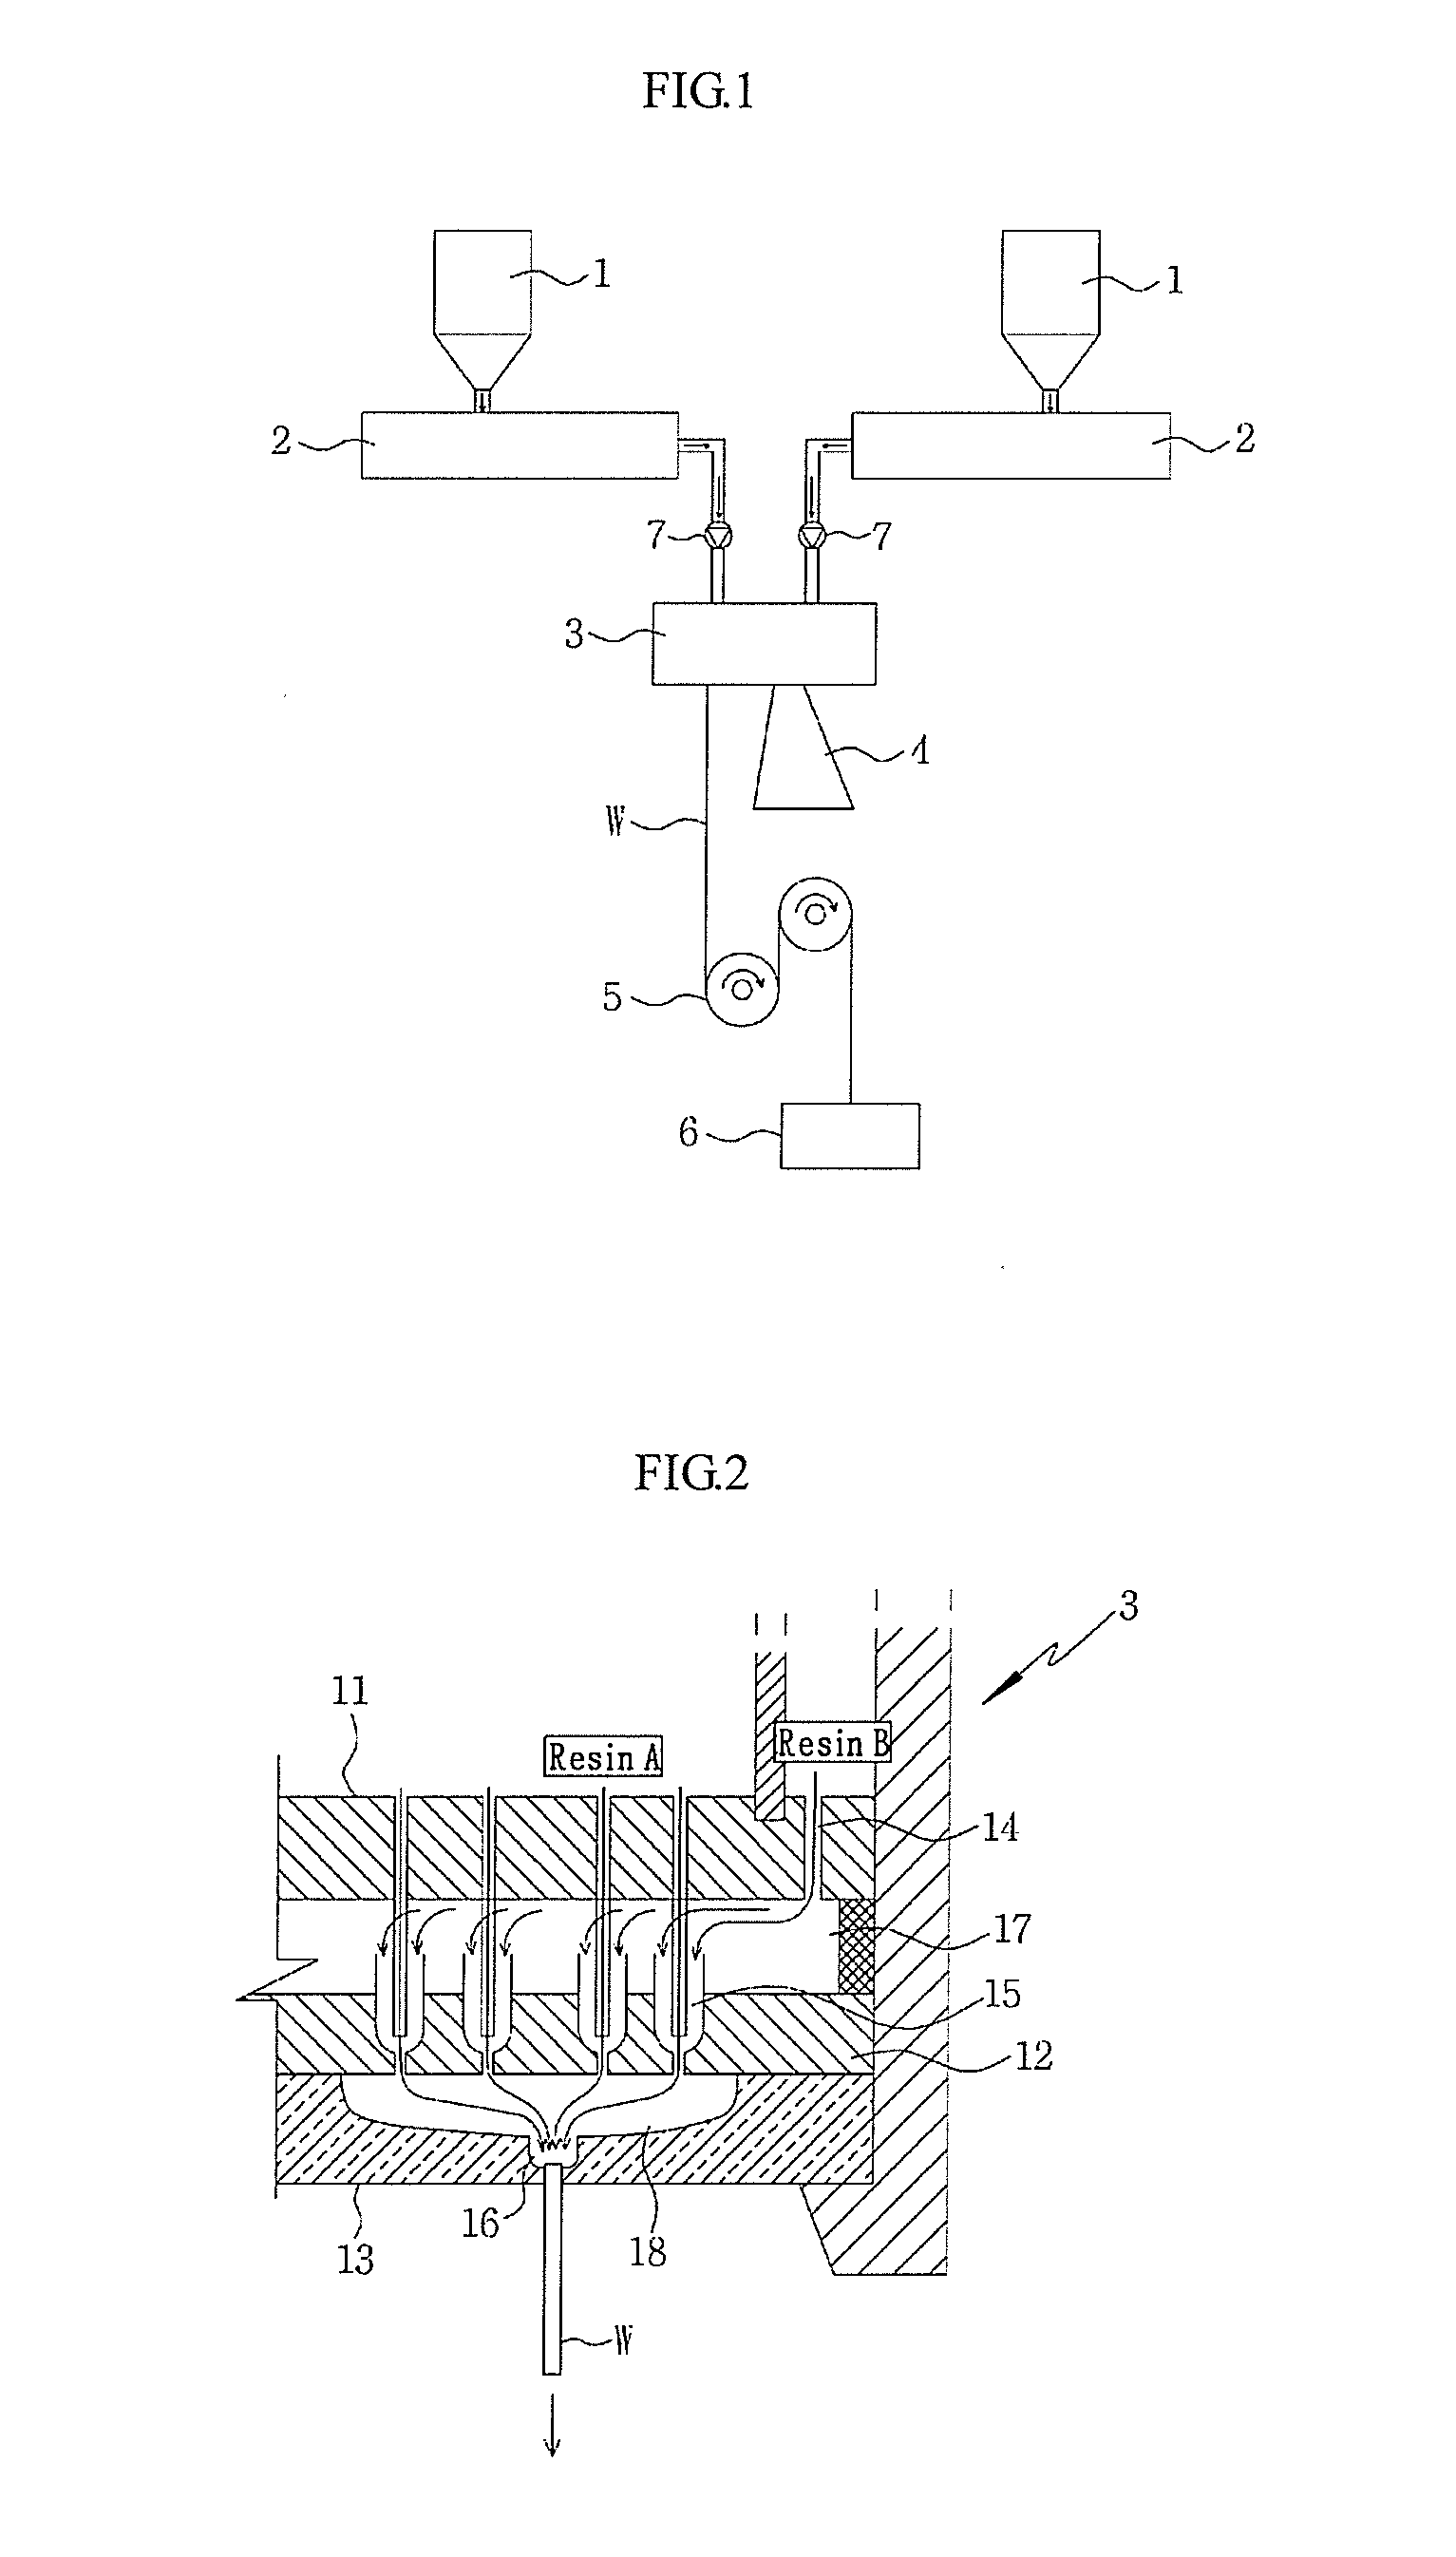 Method and apparatus for fabricating conjugate fiber, and conjugate fiber fabricated thereby